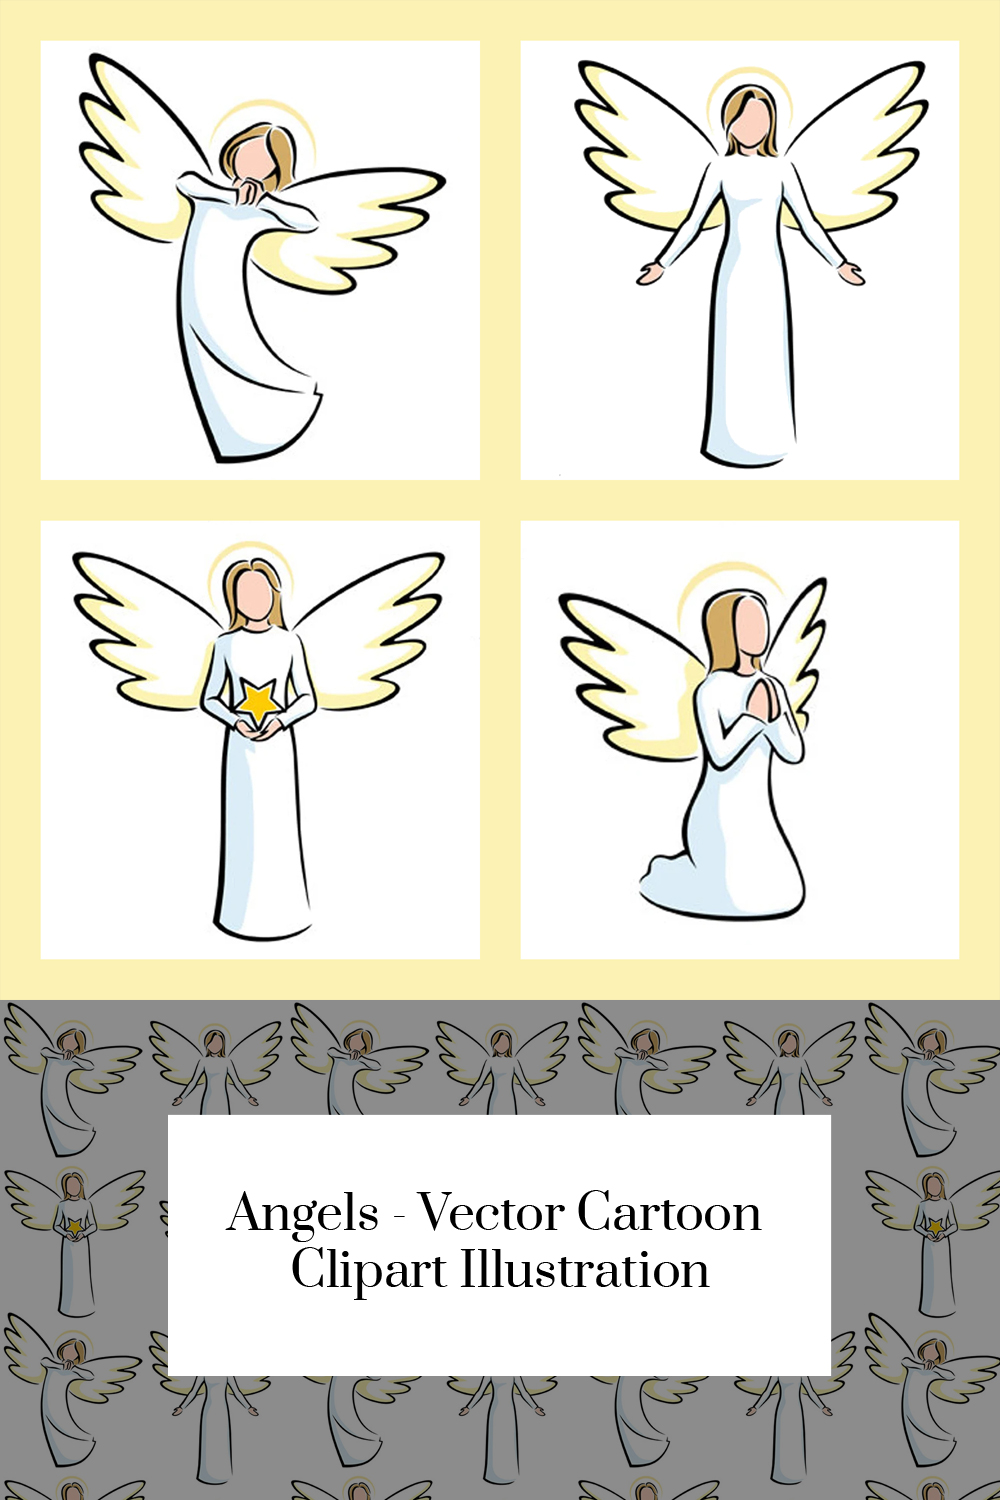 Various images of angels with wings.